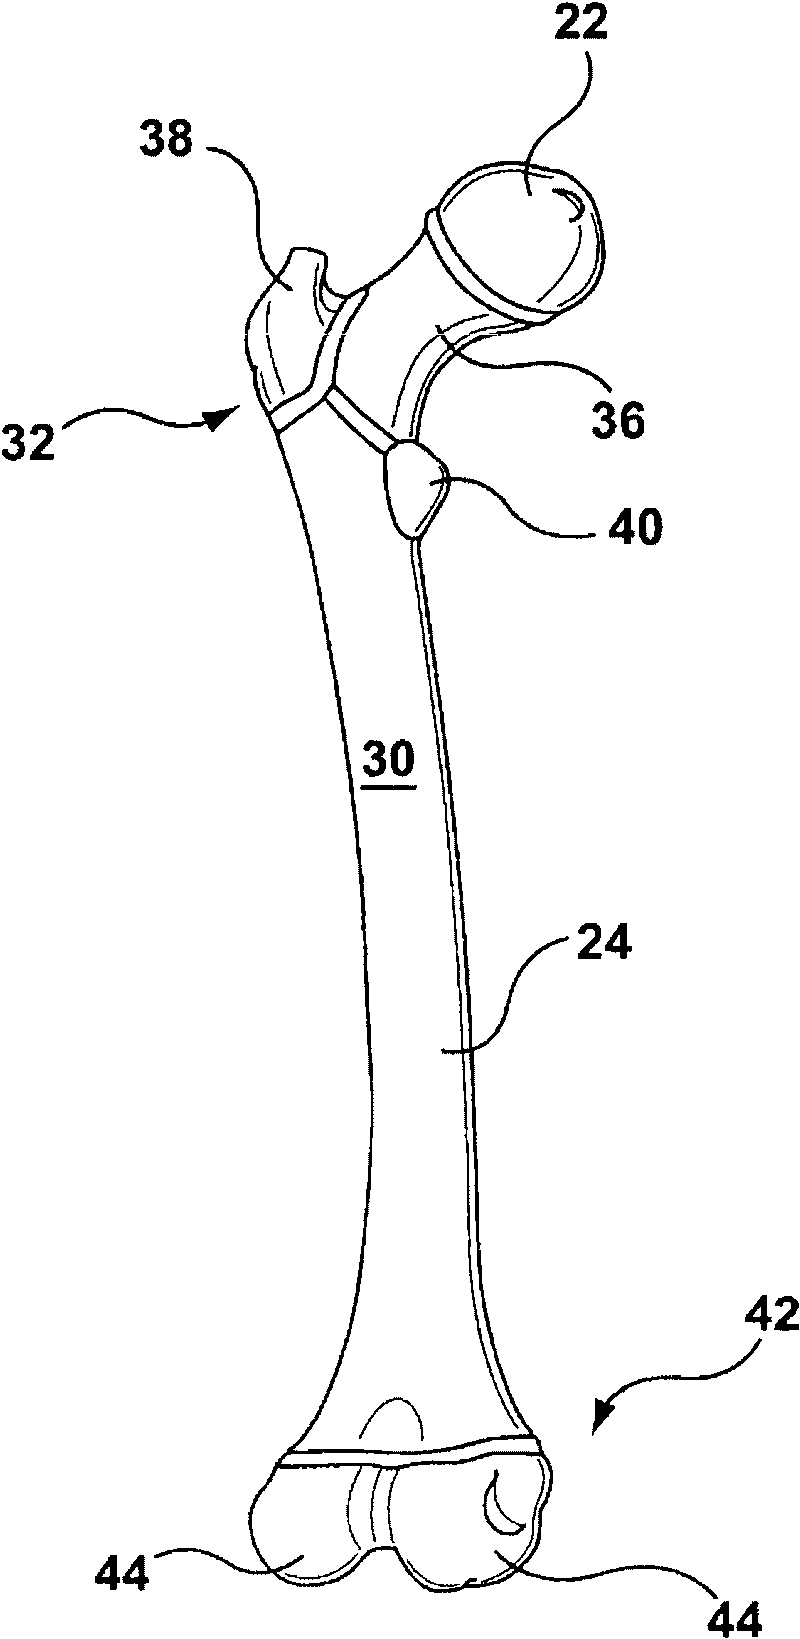 Patient-specific surgical guidance tool and method of use